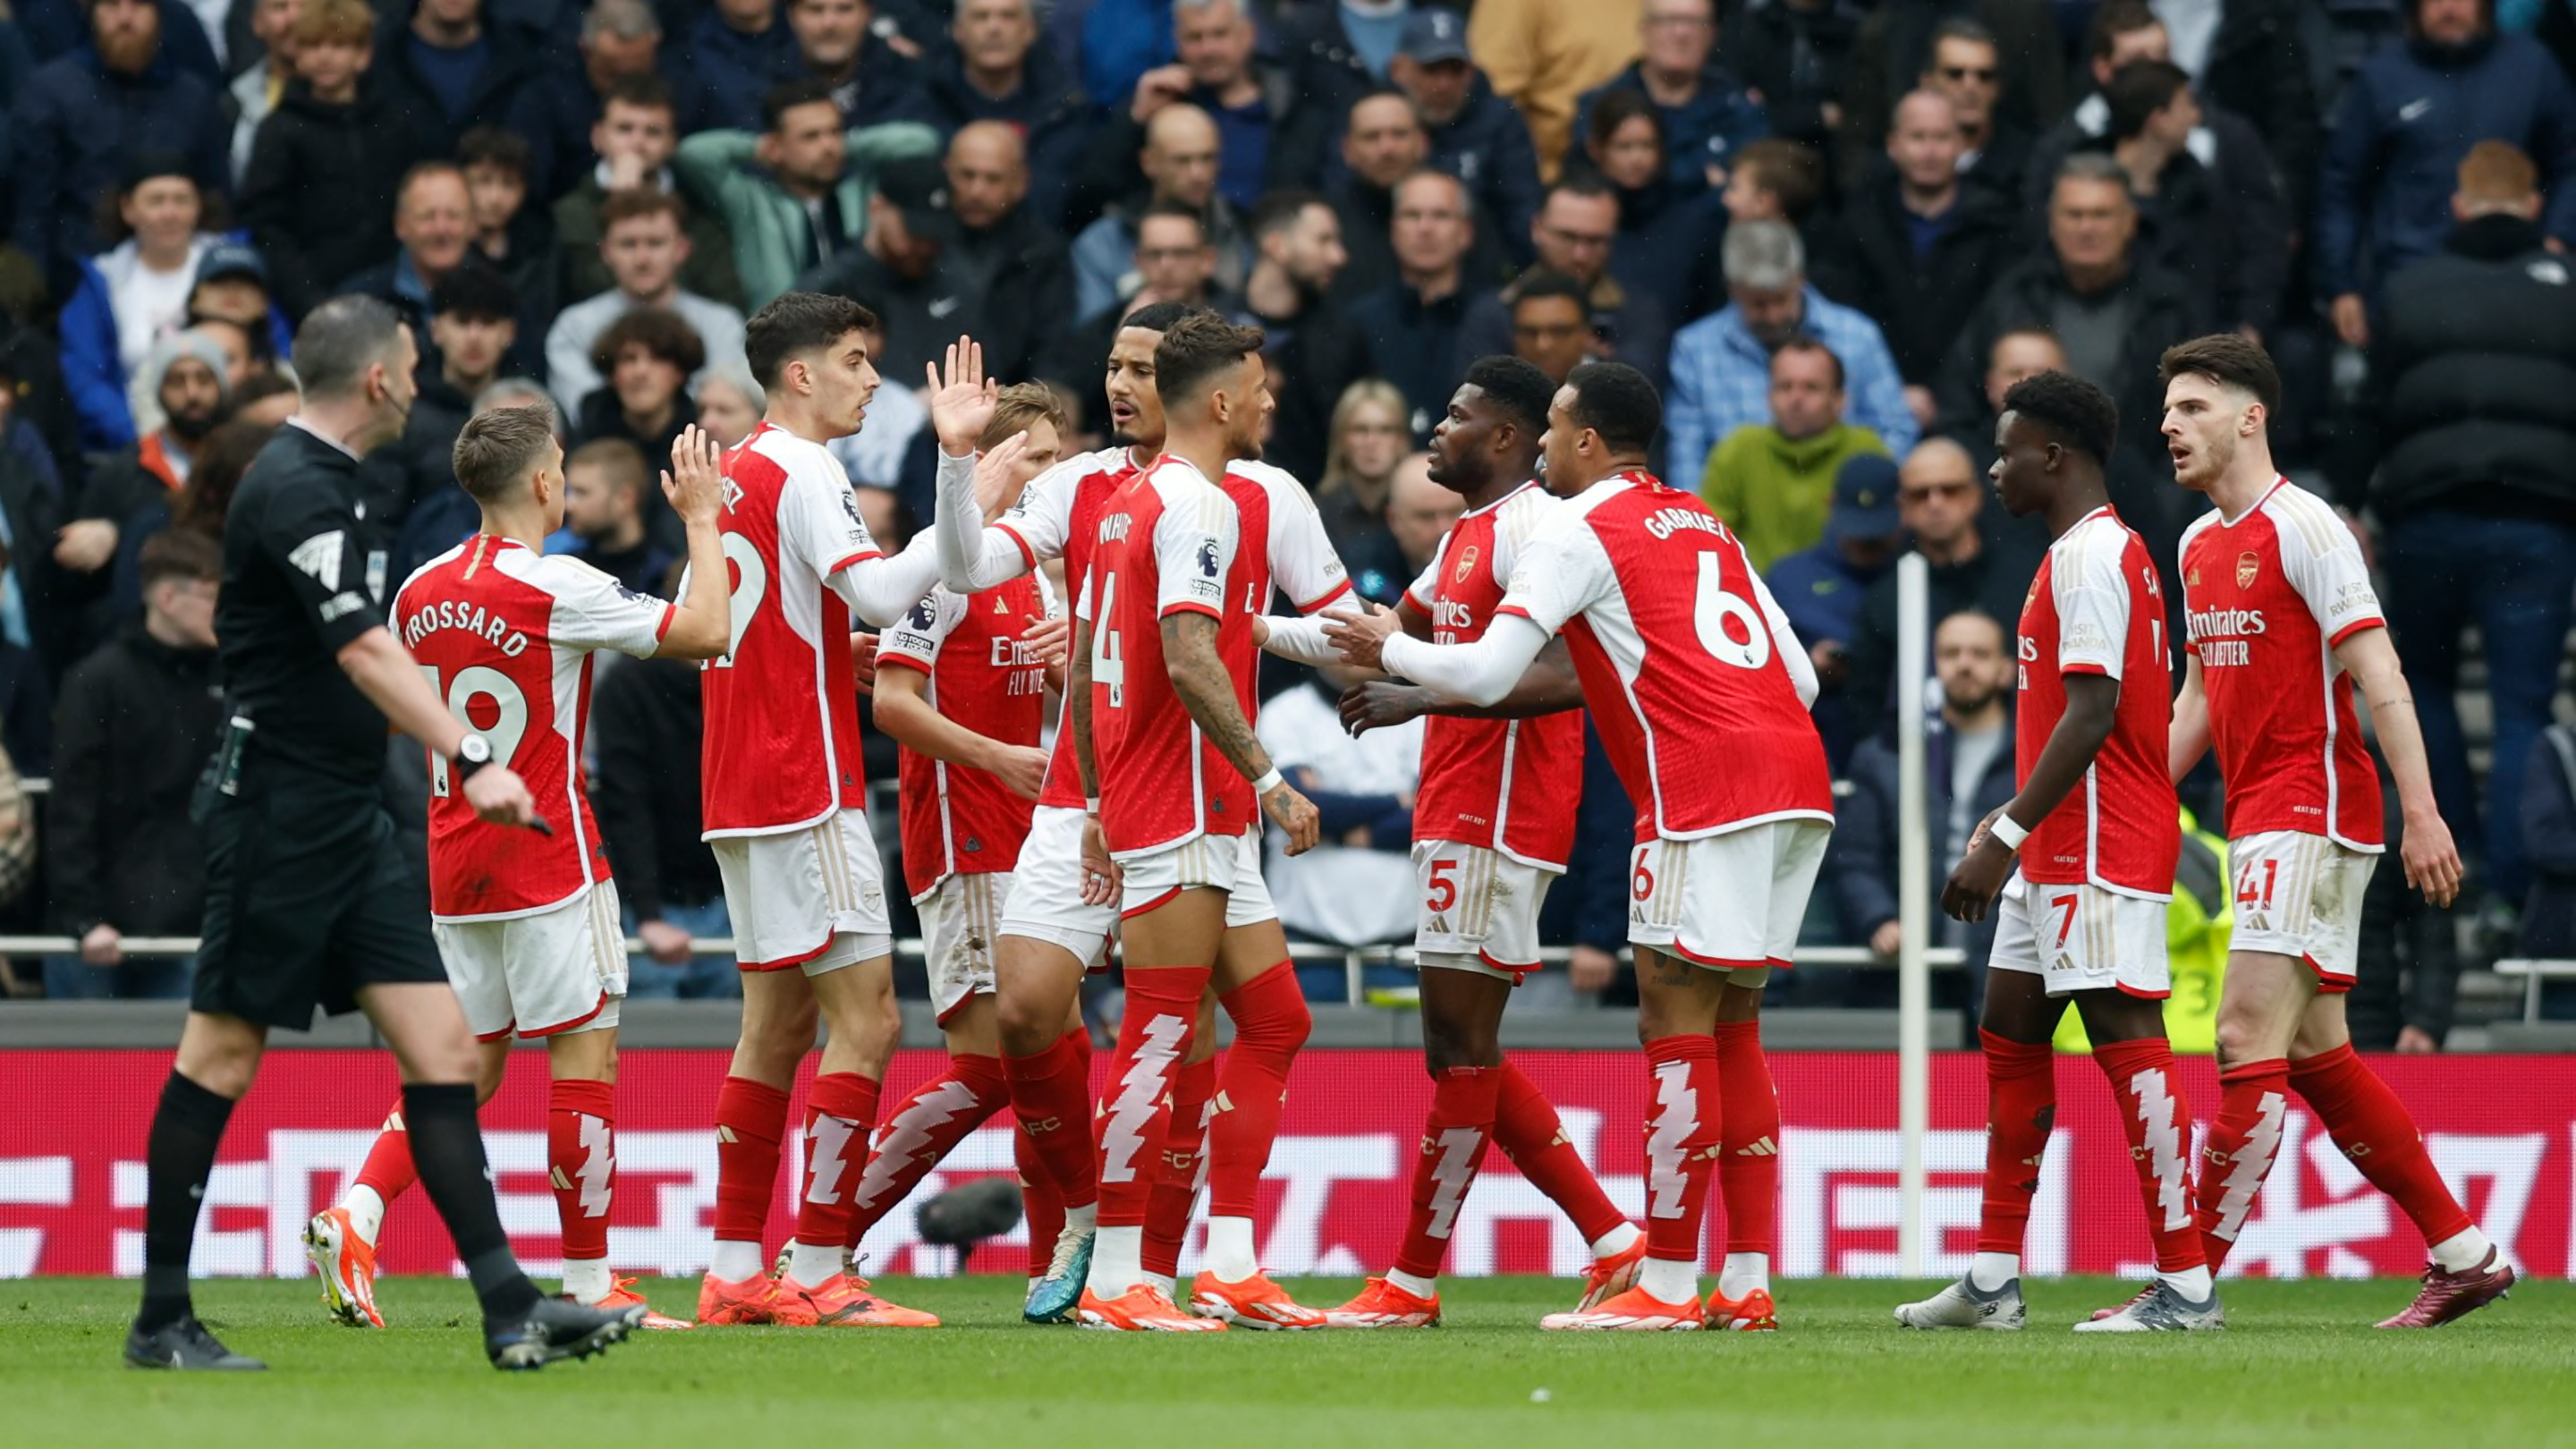 Tottenham 2-3 Arsenal: Player ratings as Gunners hold off Spurs fightback in derby thriller